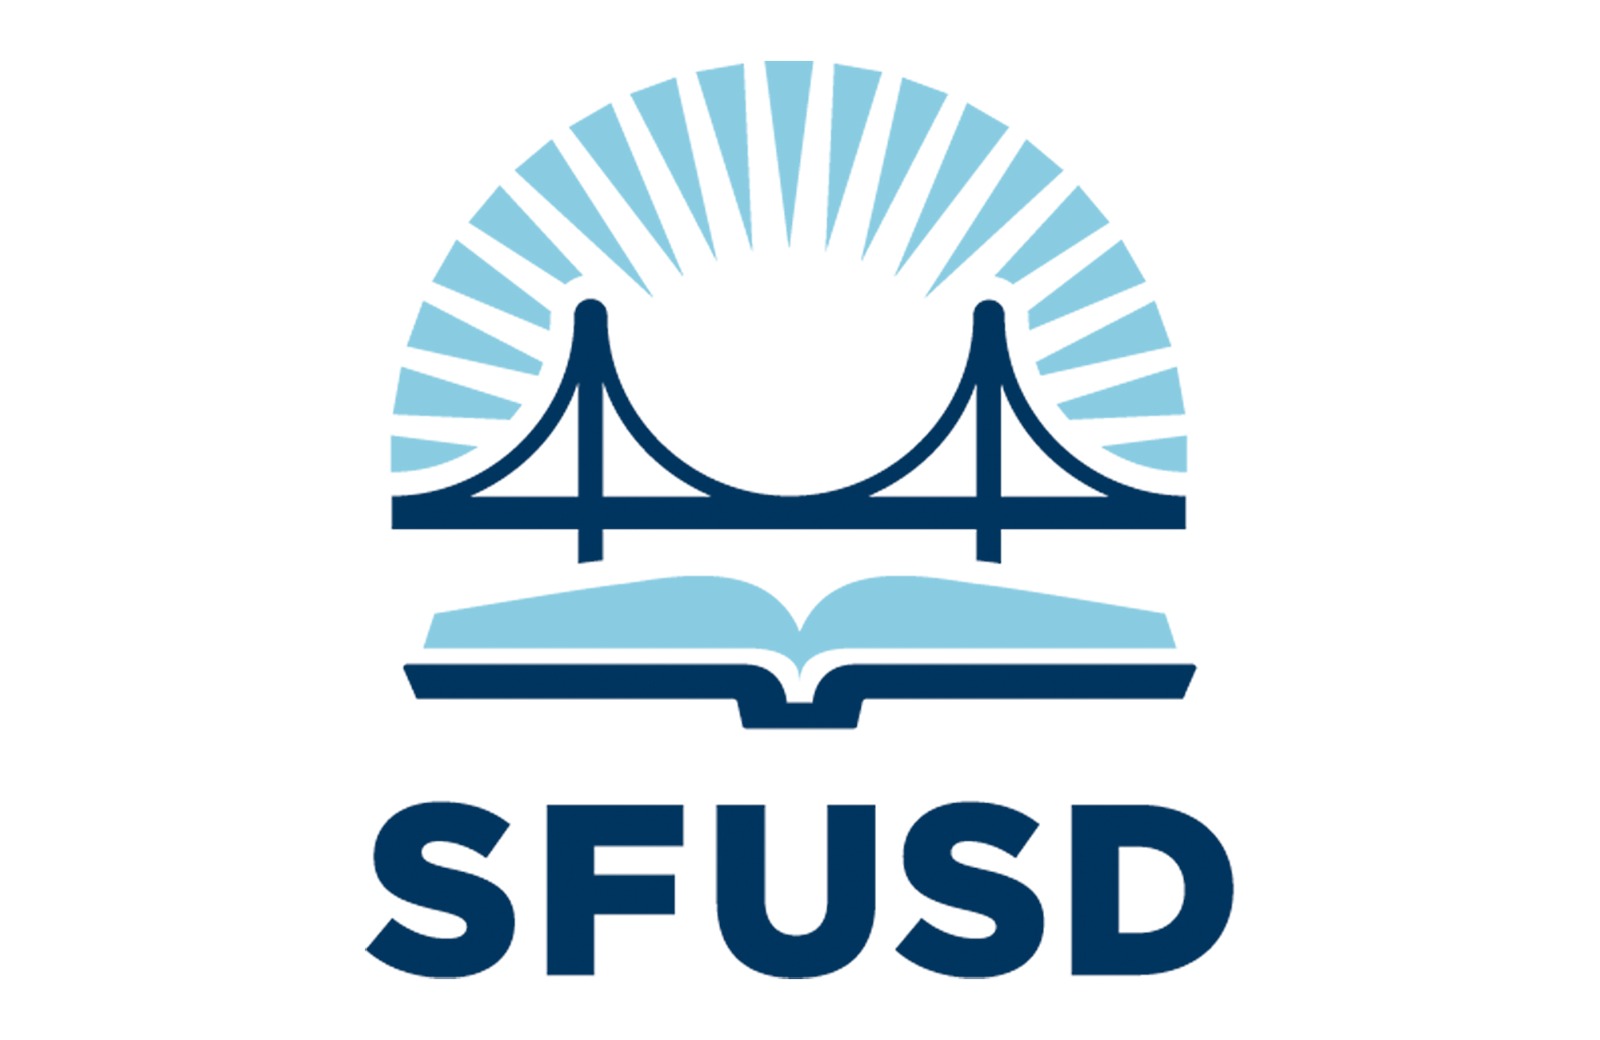 The San Francisco Unified School District is being sued over a child sexual abuse claim